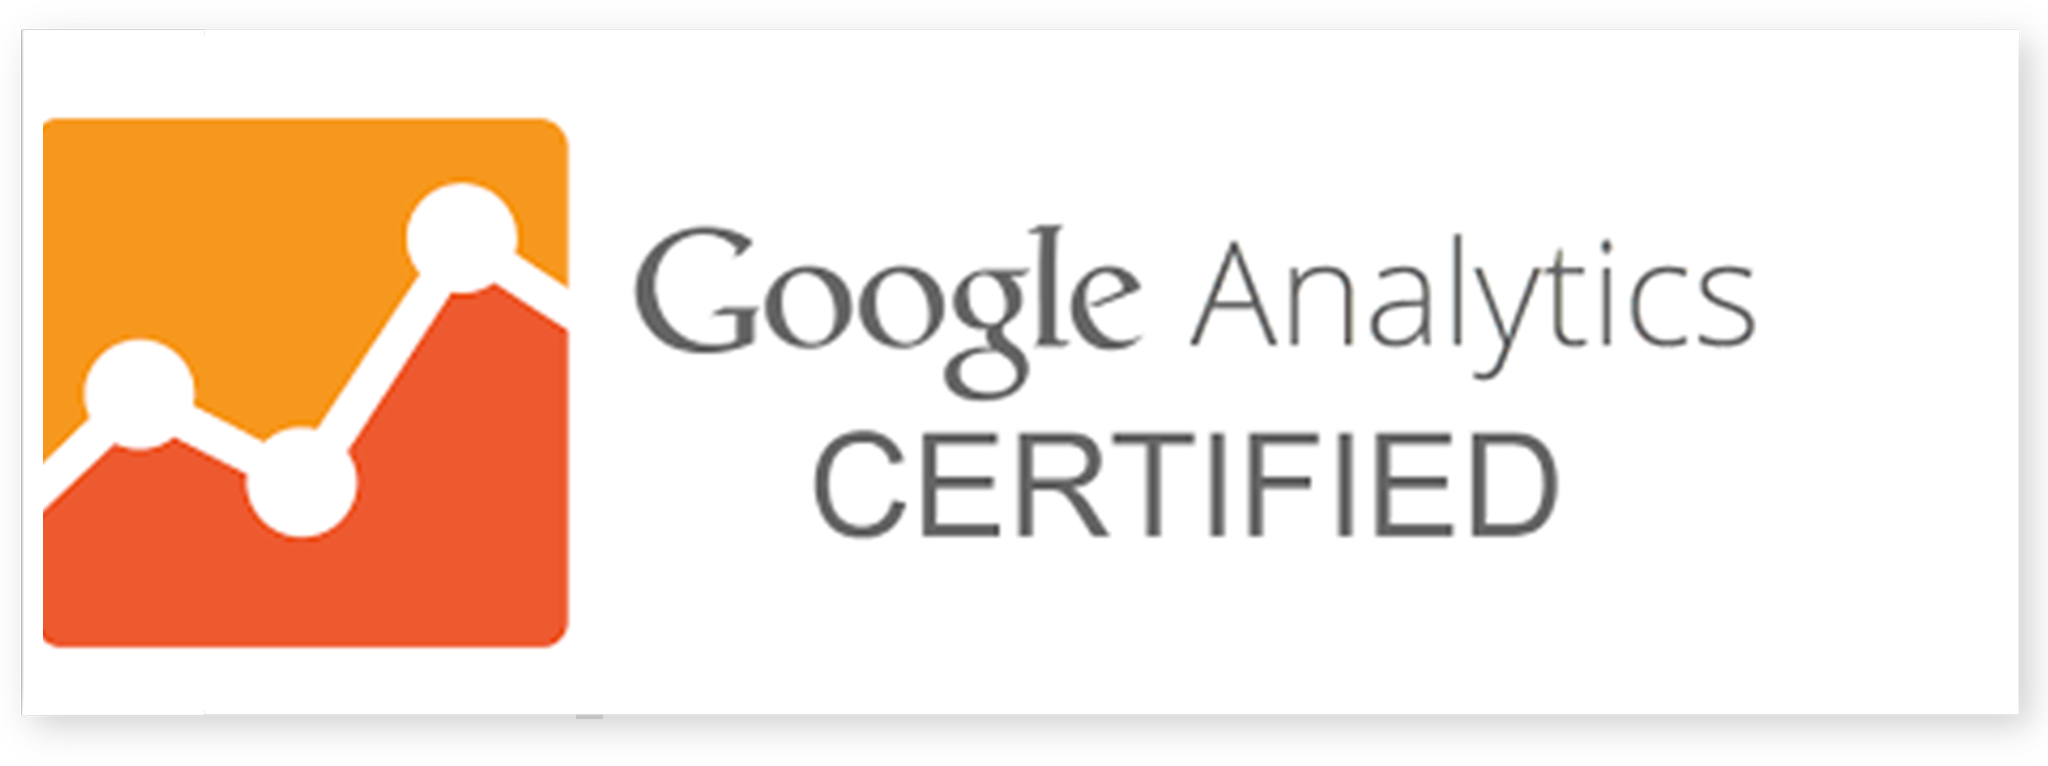 Google Analytics Certified Agency Service Management Compnay